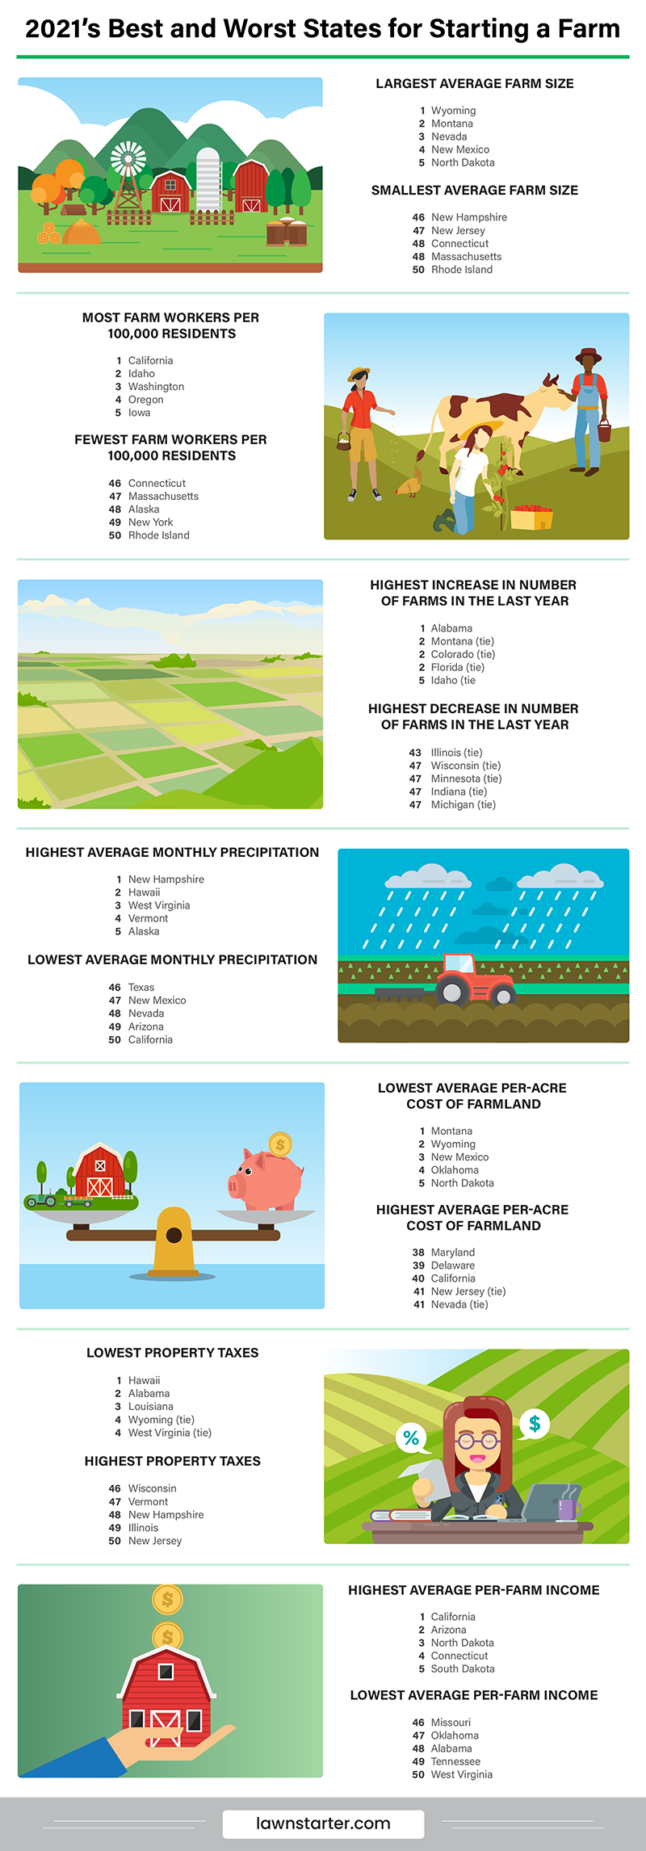 Infographic showing the best and worst states to start a farm